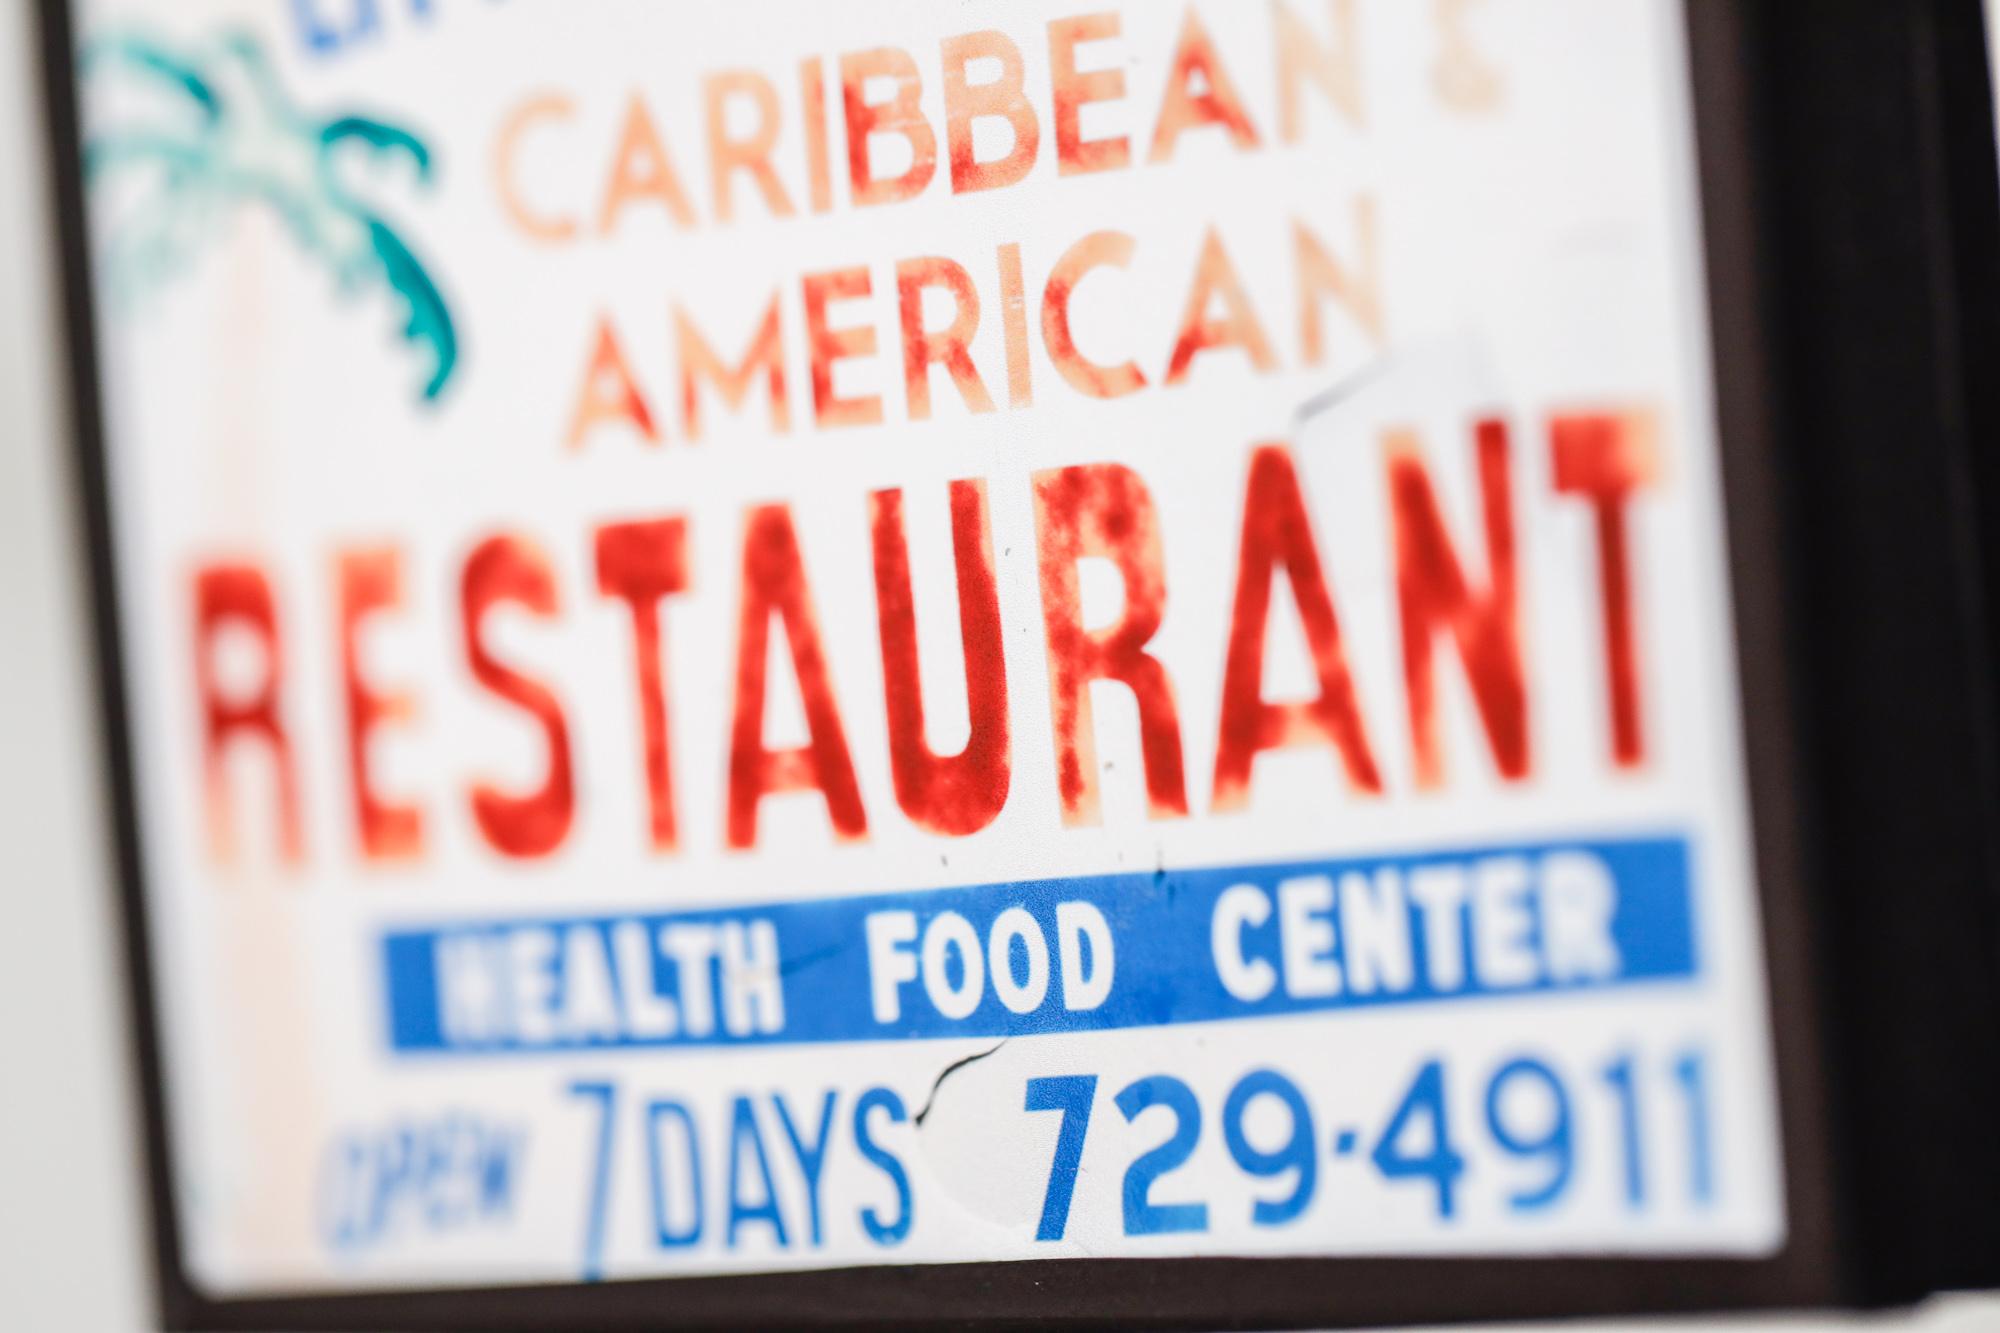 Little Delicious Caribbean and American Restaurant 2